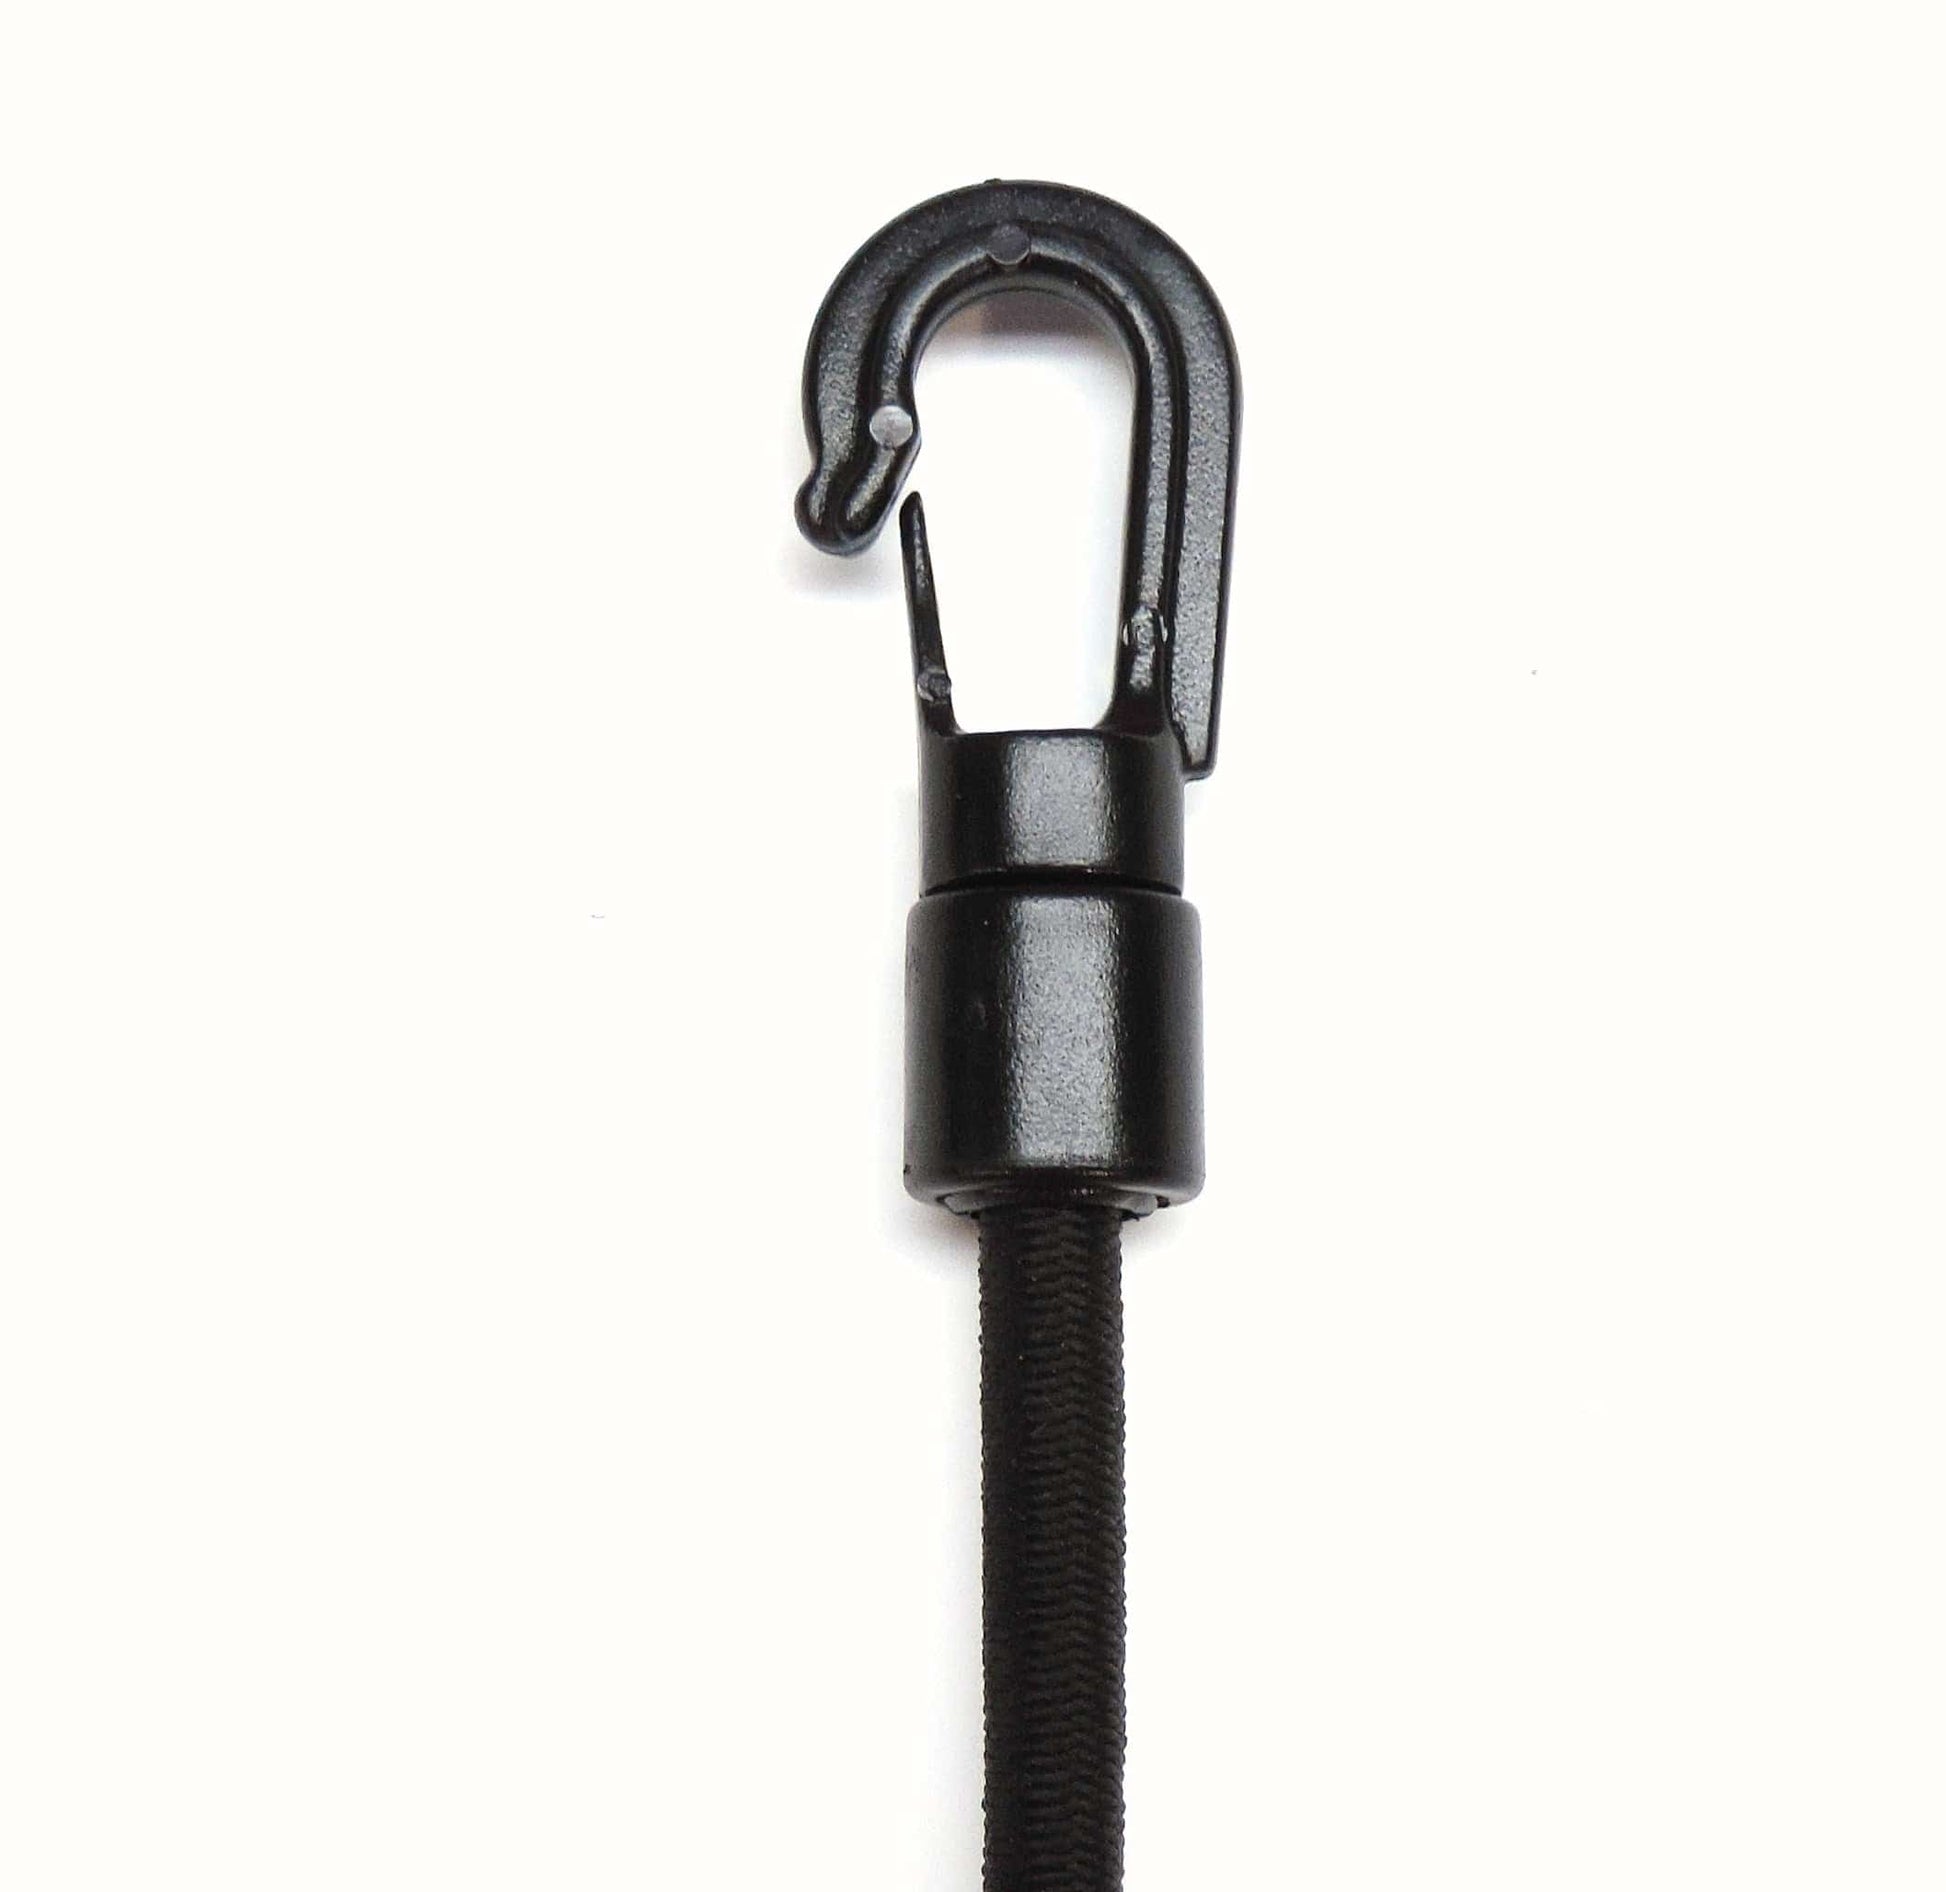 3/16 DOUBLE ENDED METAL T-BAR TOGGLE BUNGEE CORD